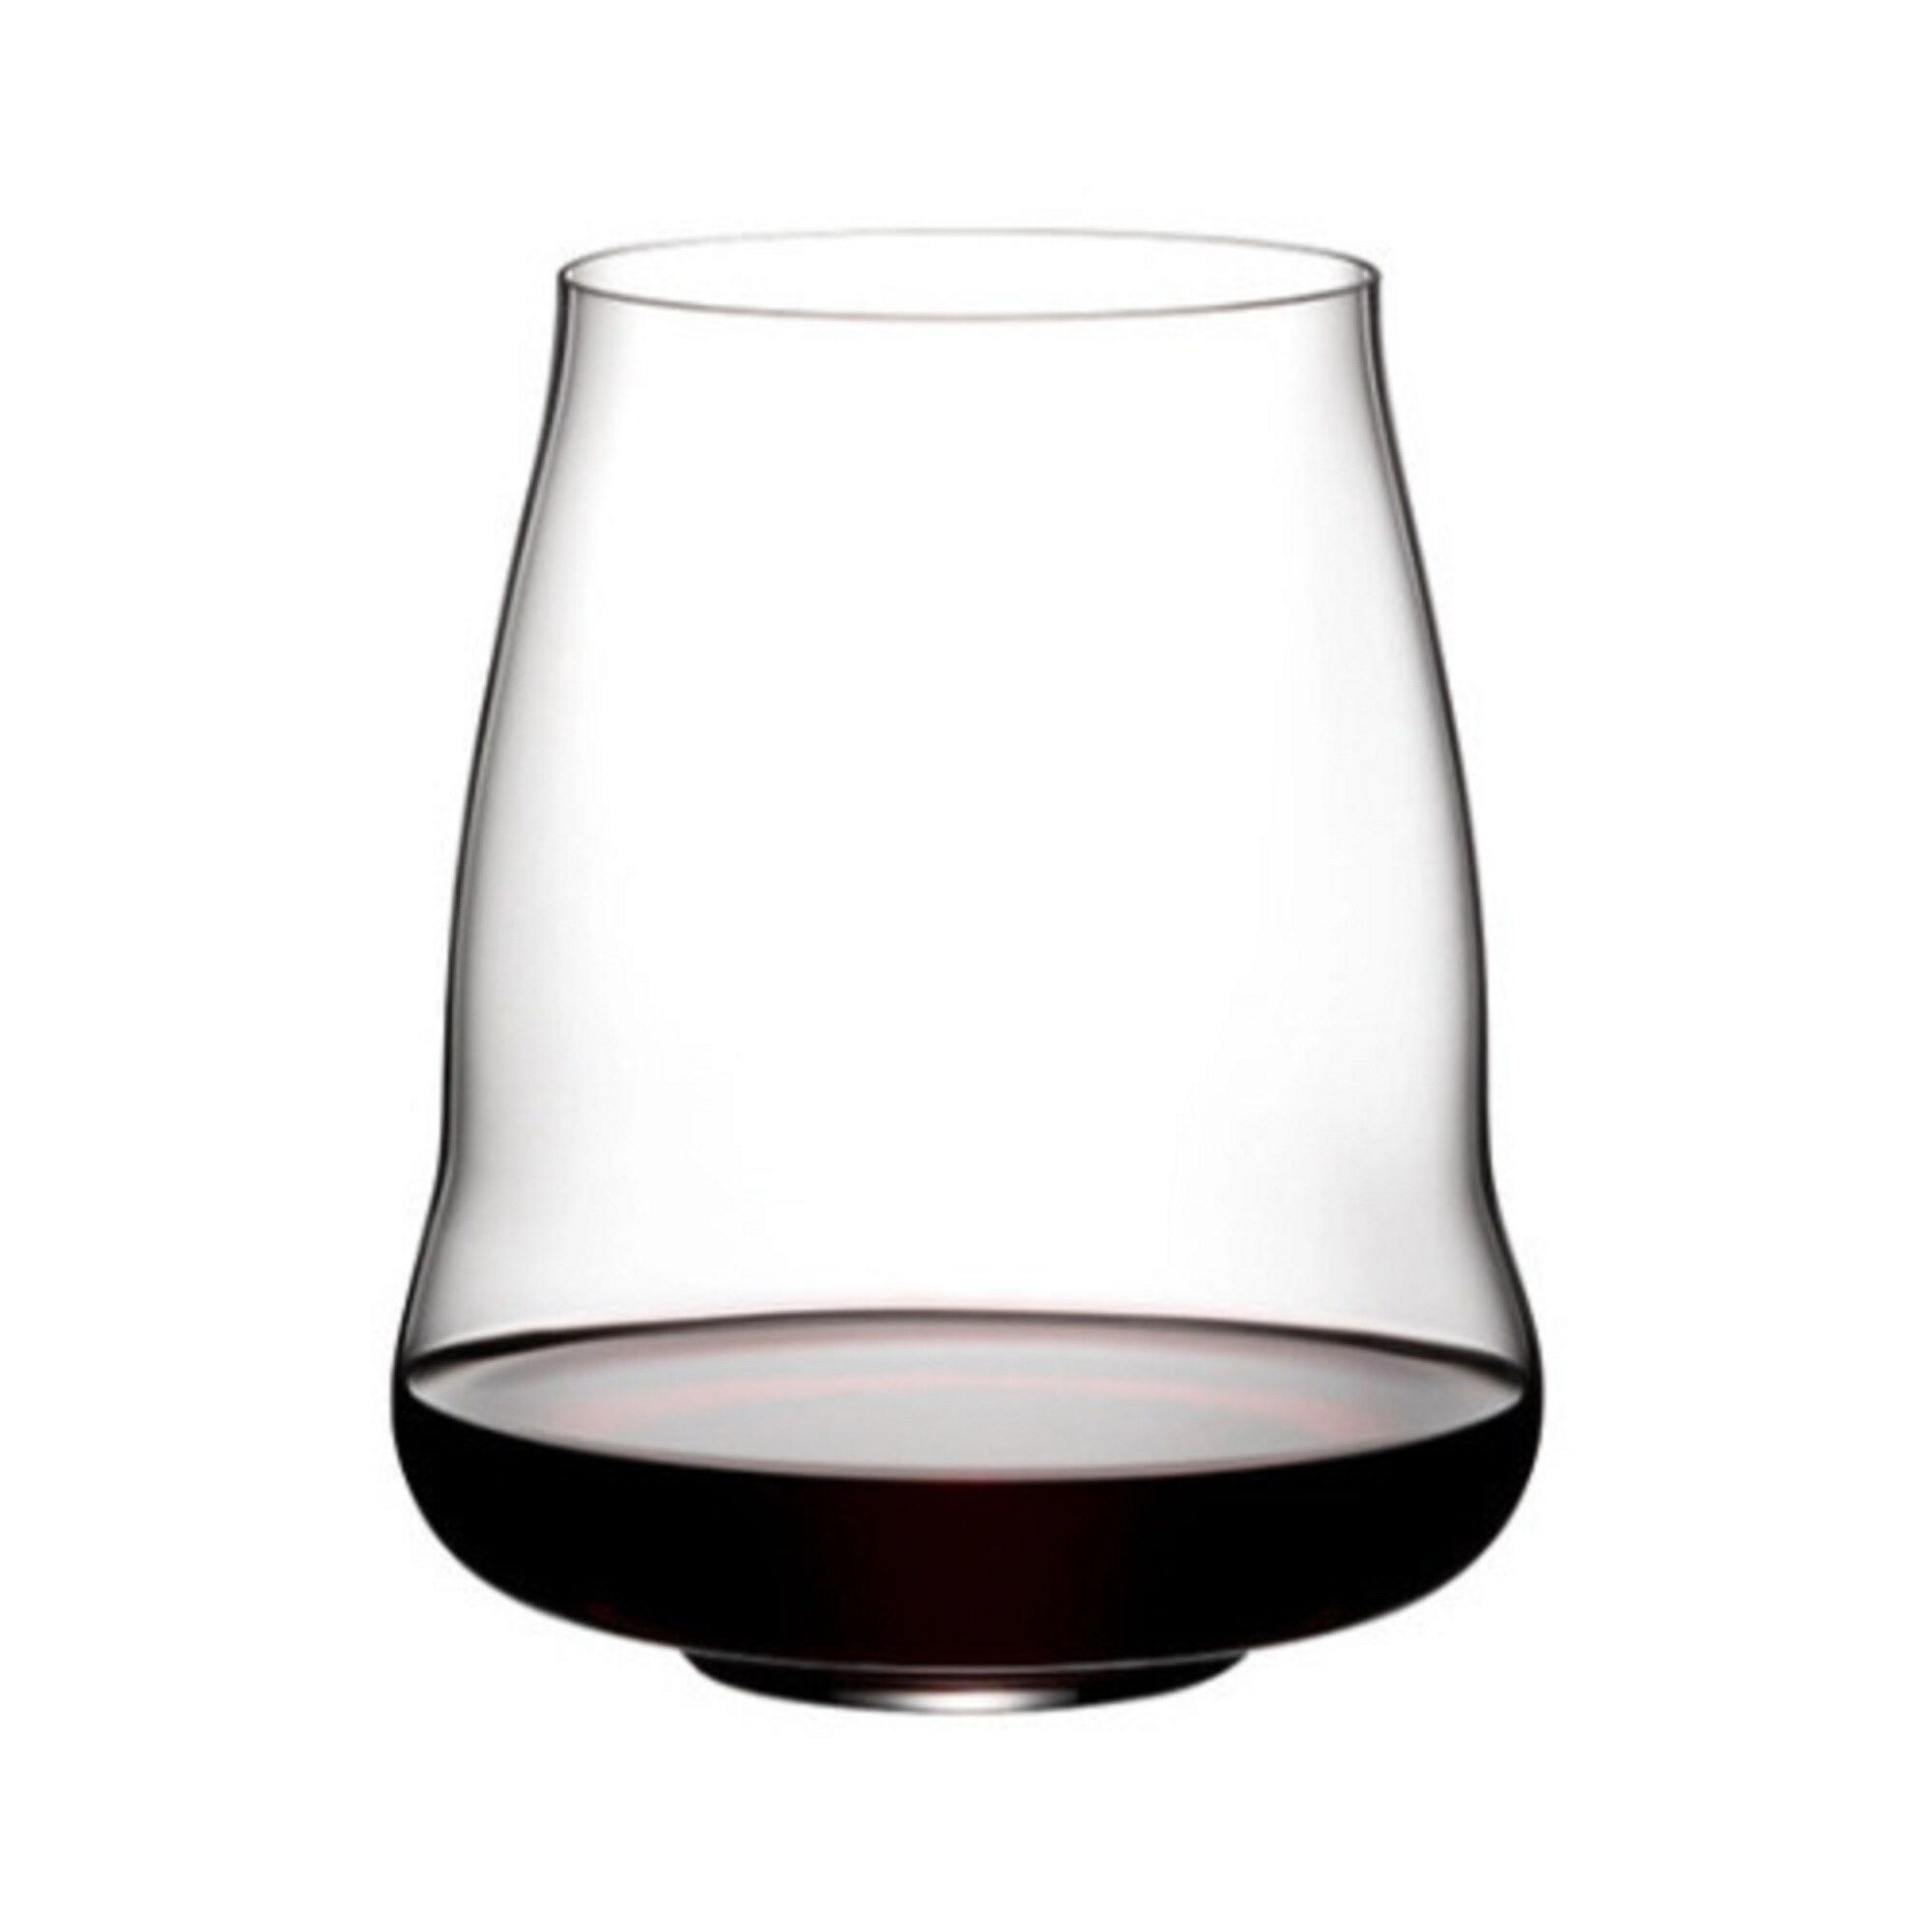 https://ak1.ostkcdn.com/images/products/is/images/direct/e44f1825eec64bee89376a11a15c8ed48c5ca411/Riedel-SL-Stemless-Wings-Pinot-Noir-Nebbiolo-Wine-Glass-%284-Pk%29-Bundle.jpg